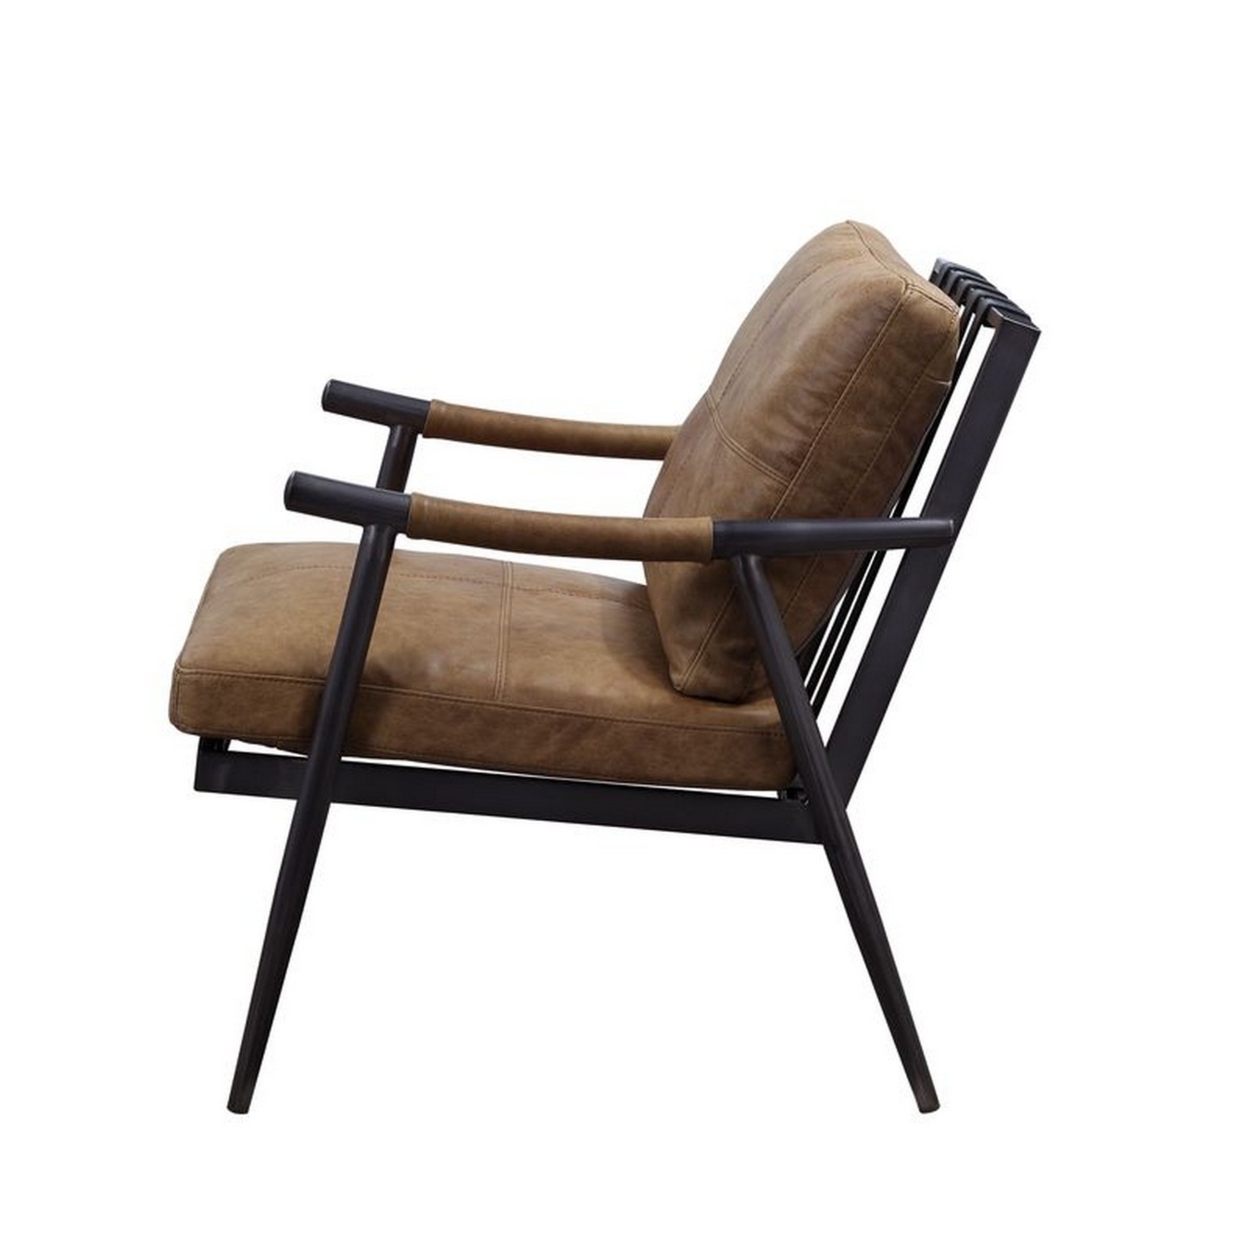 Accent Chair With Leatherette Seat And Tubular Frame, Brown- Saltoro Sherpi